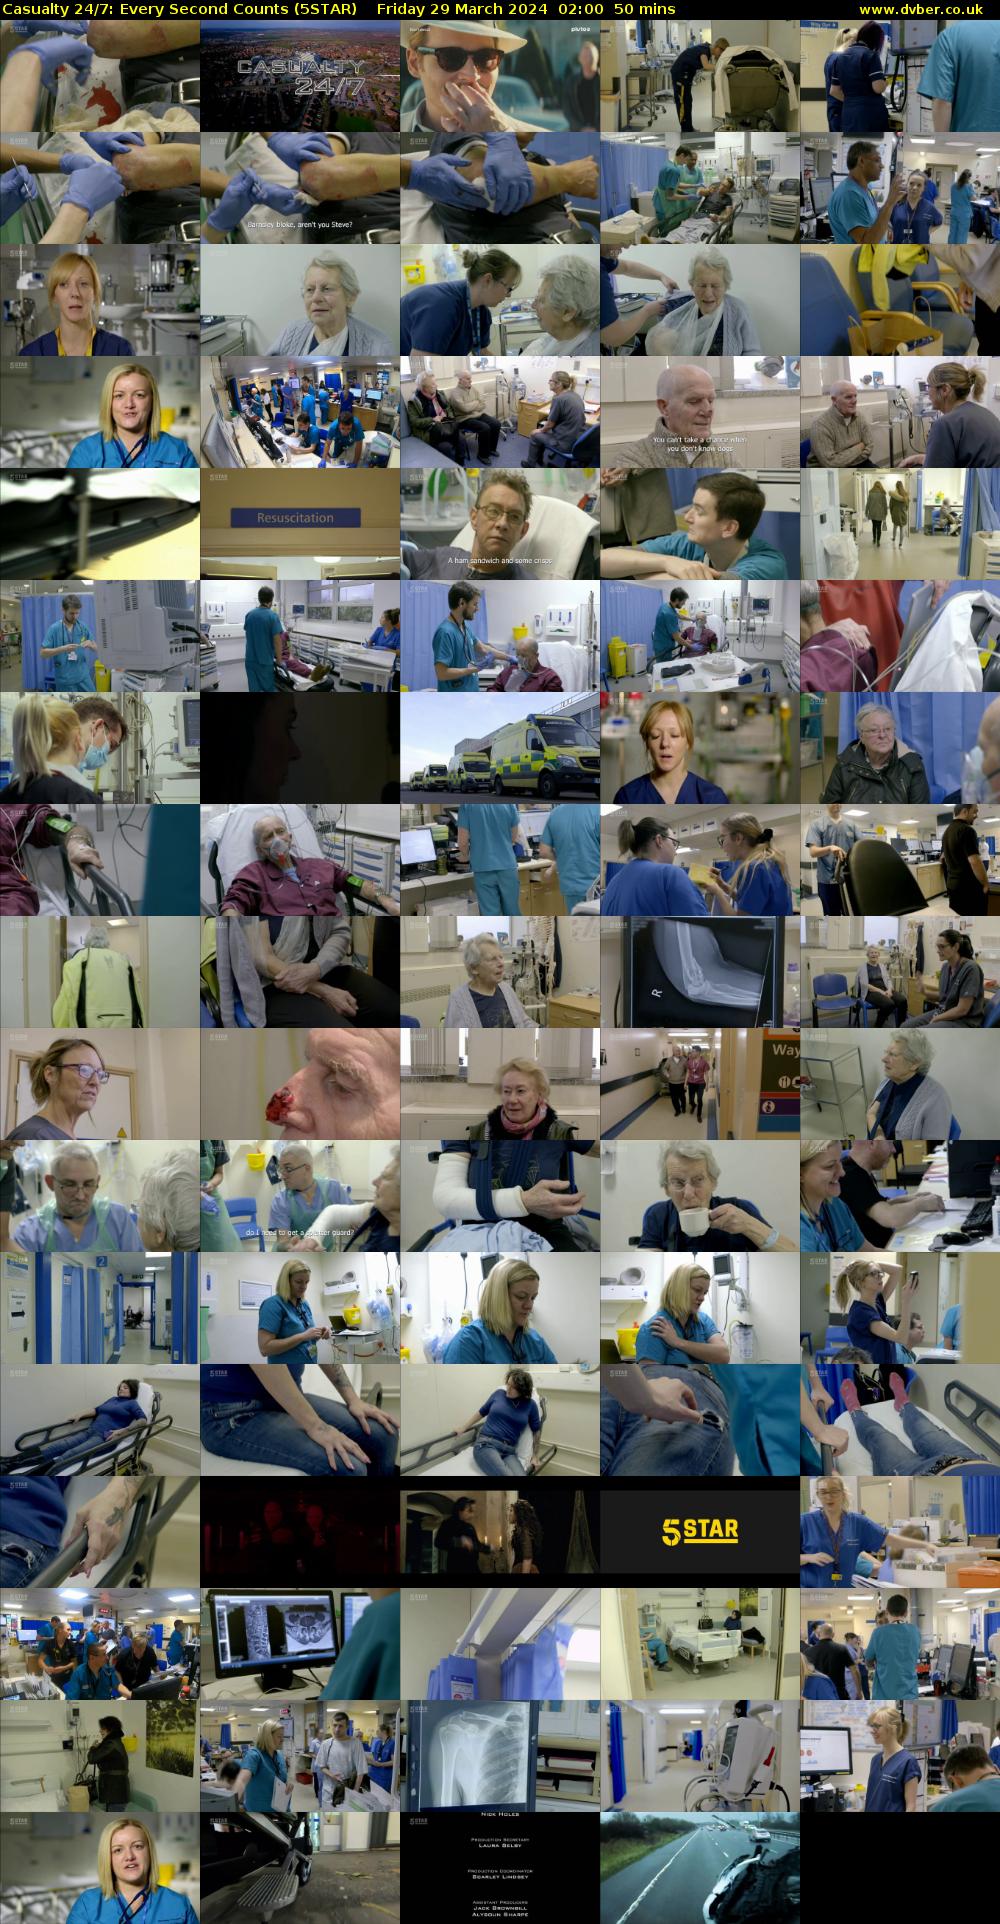 Casualty 24/7: Every Second Counts (5STAR) Friday 29 March 2024 02:00 - 02:50